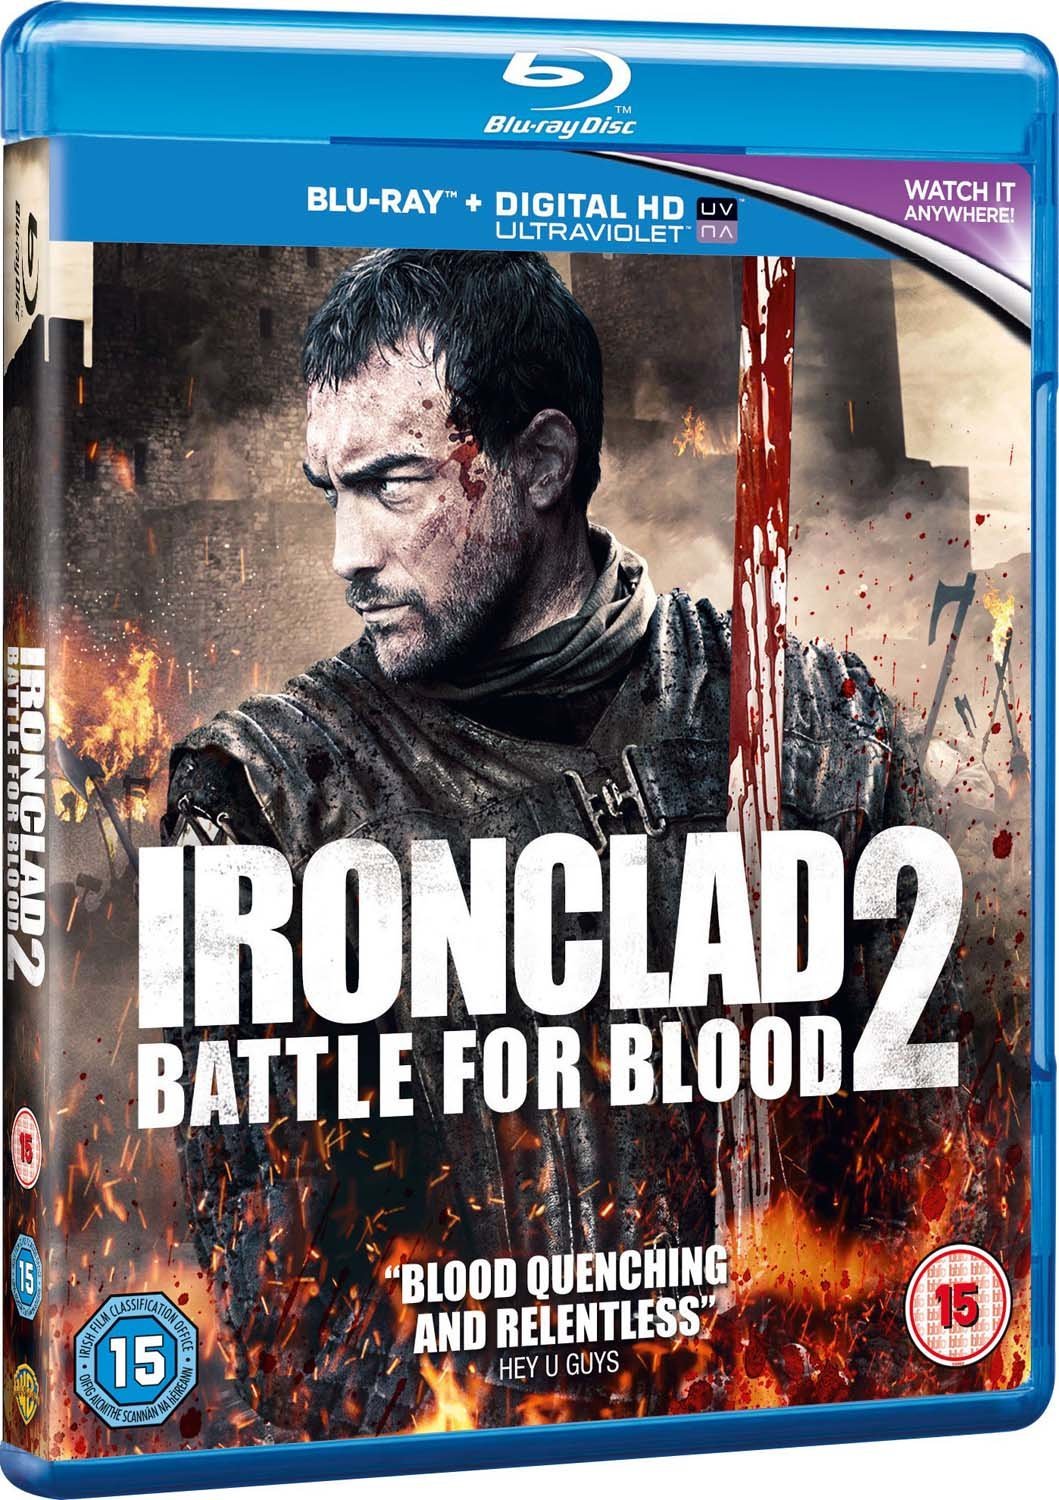 Ironclad 2: Battle For Blood (Blu-ray)